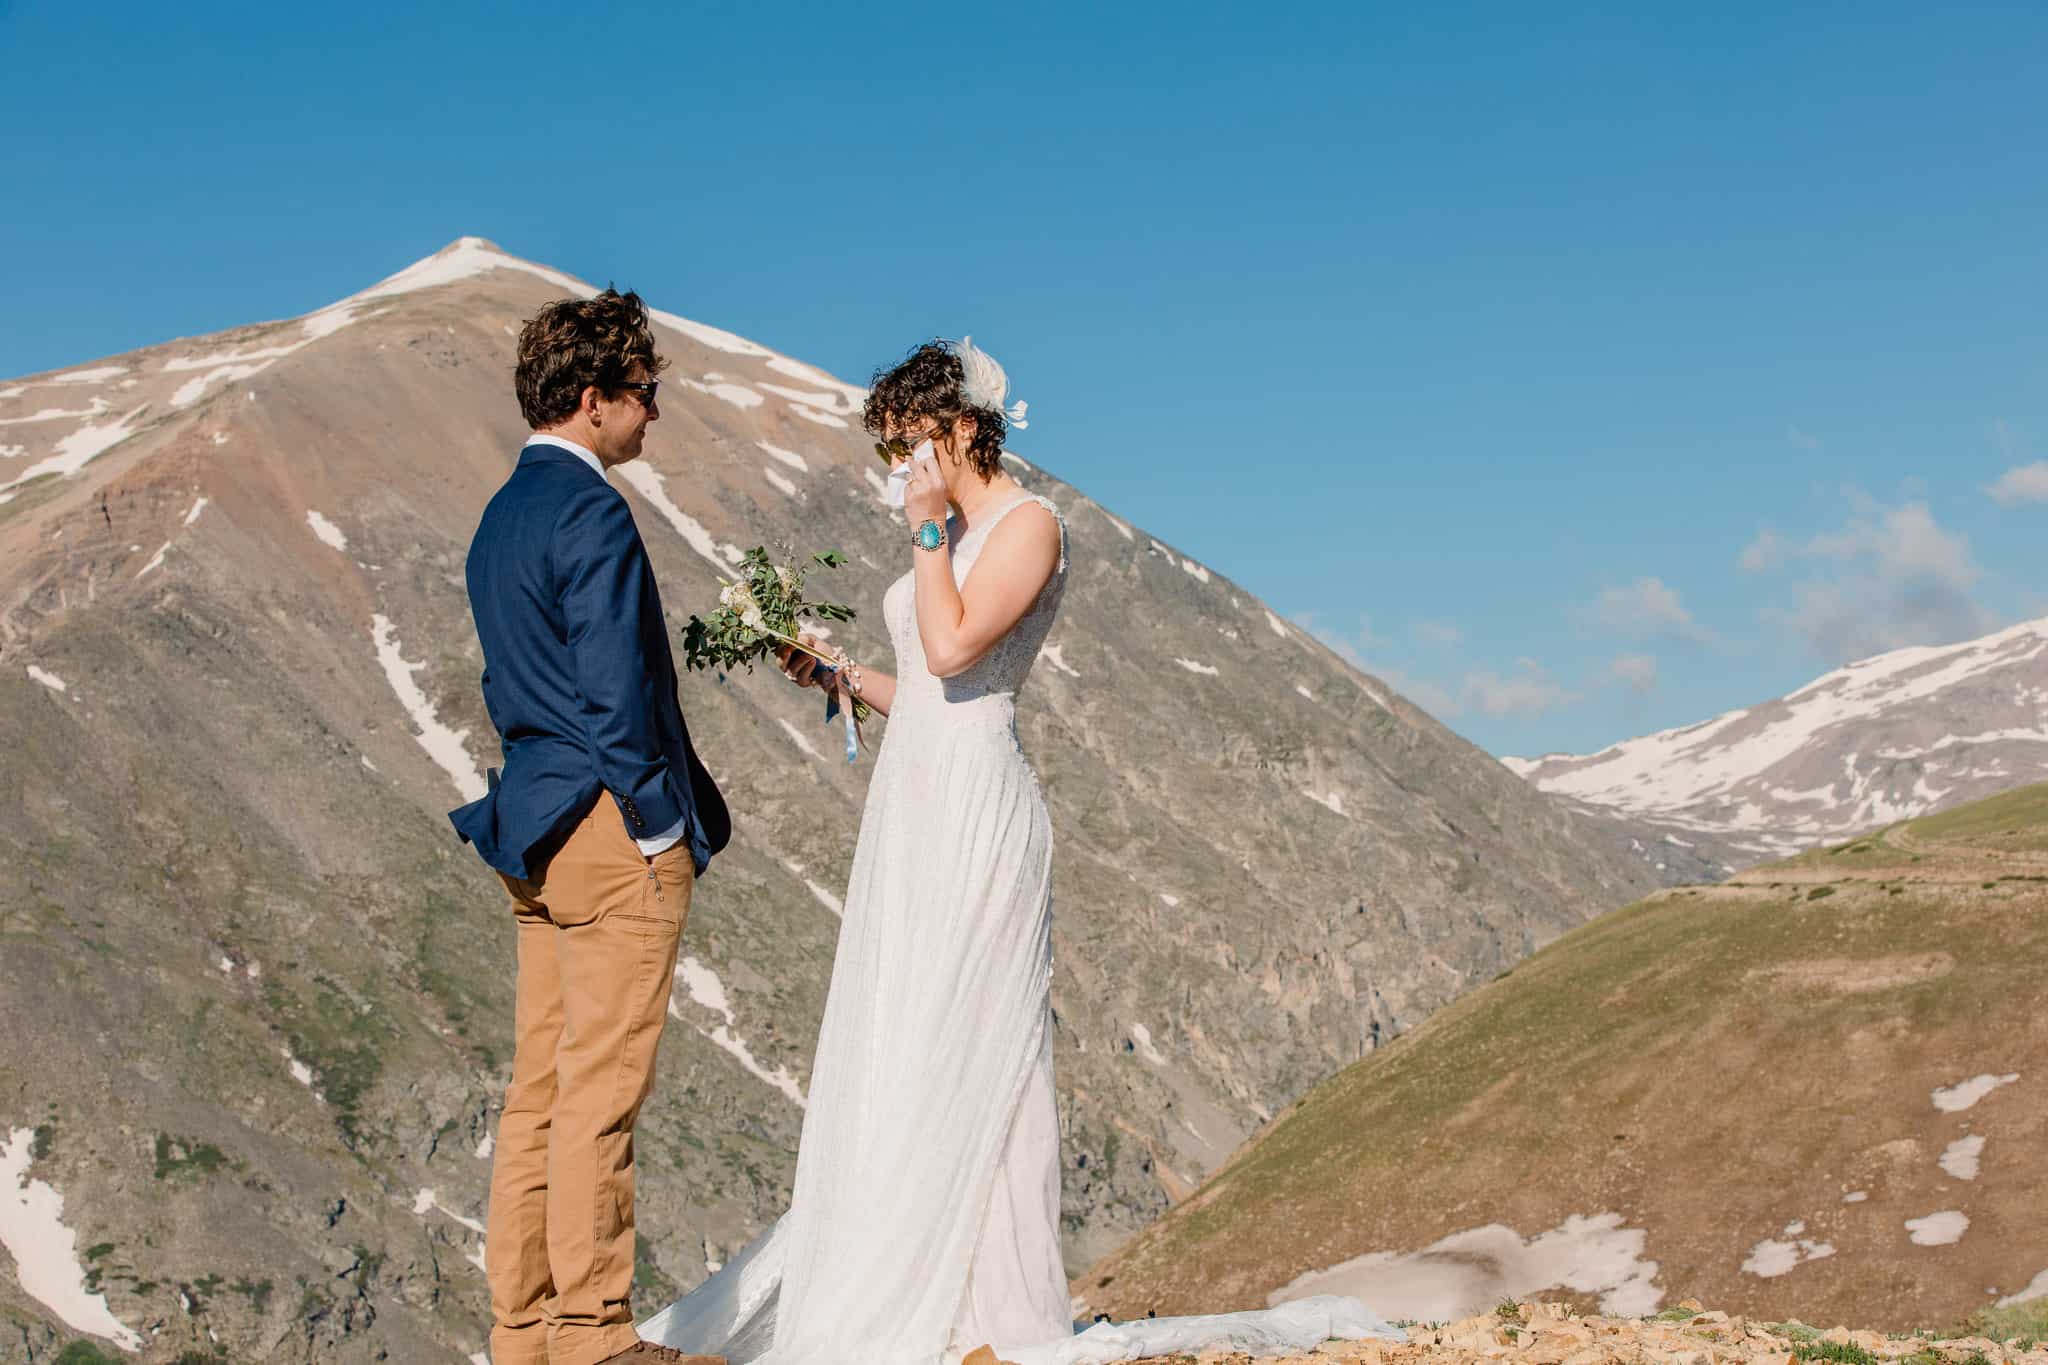 couple sharing private vows on top of a mountain with mountains in the background